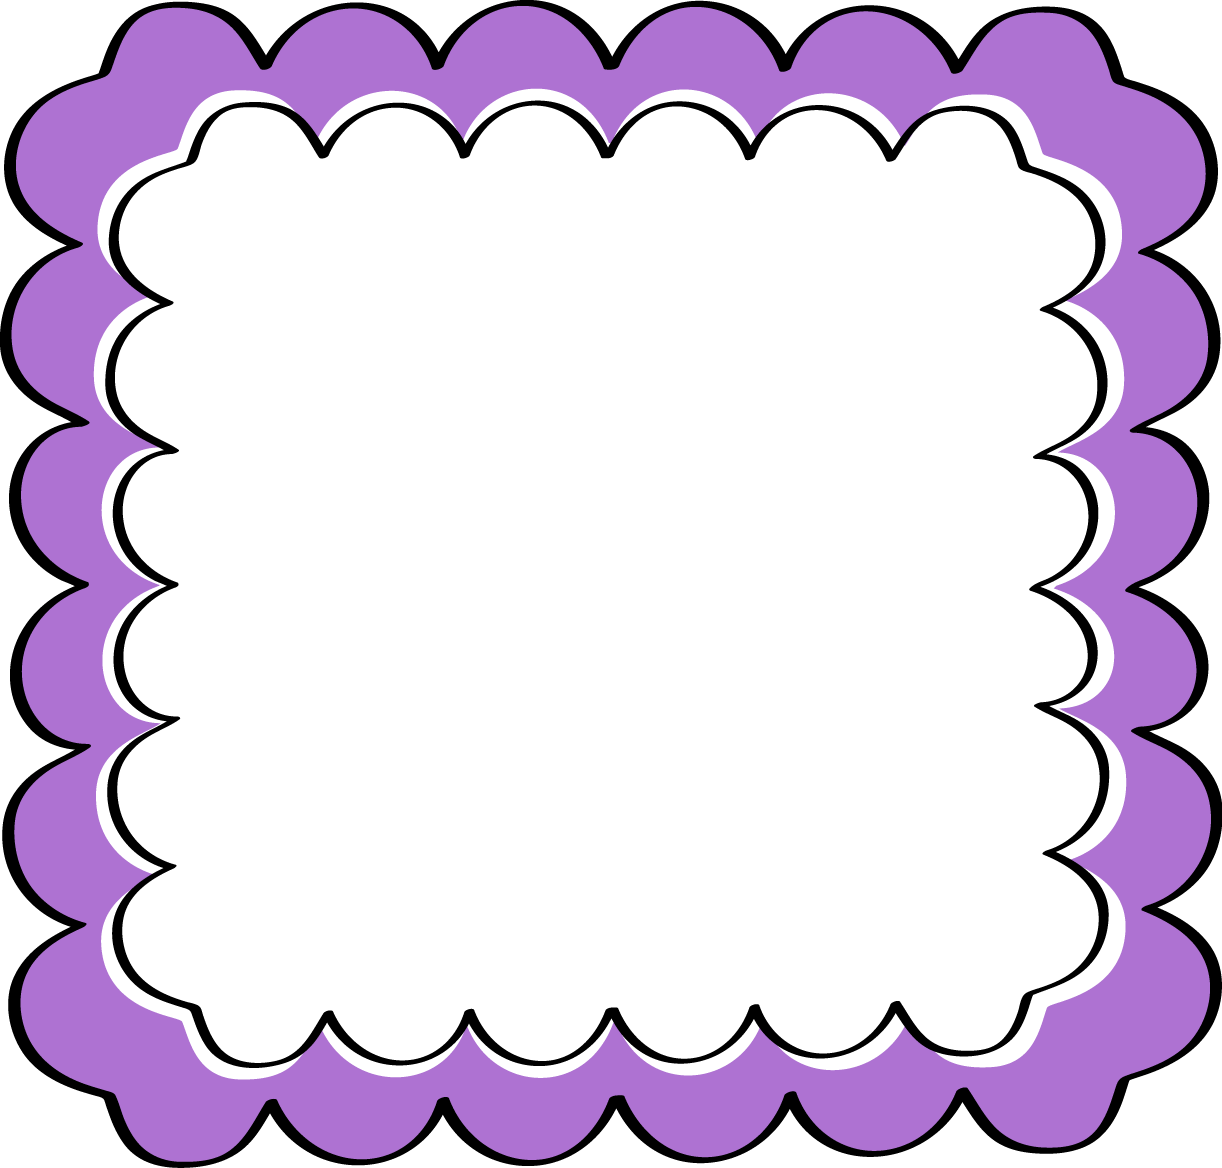 Clip Art Borders and Frames